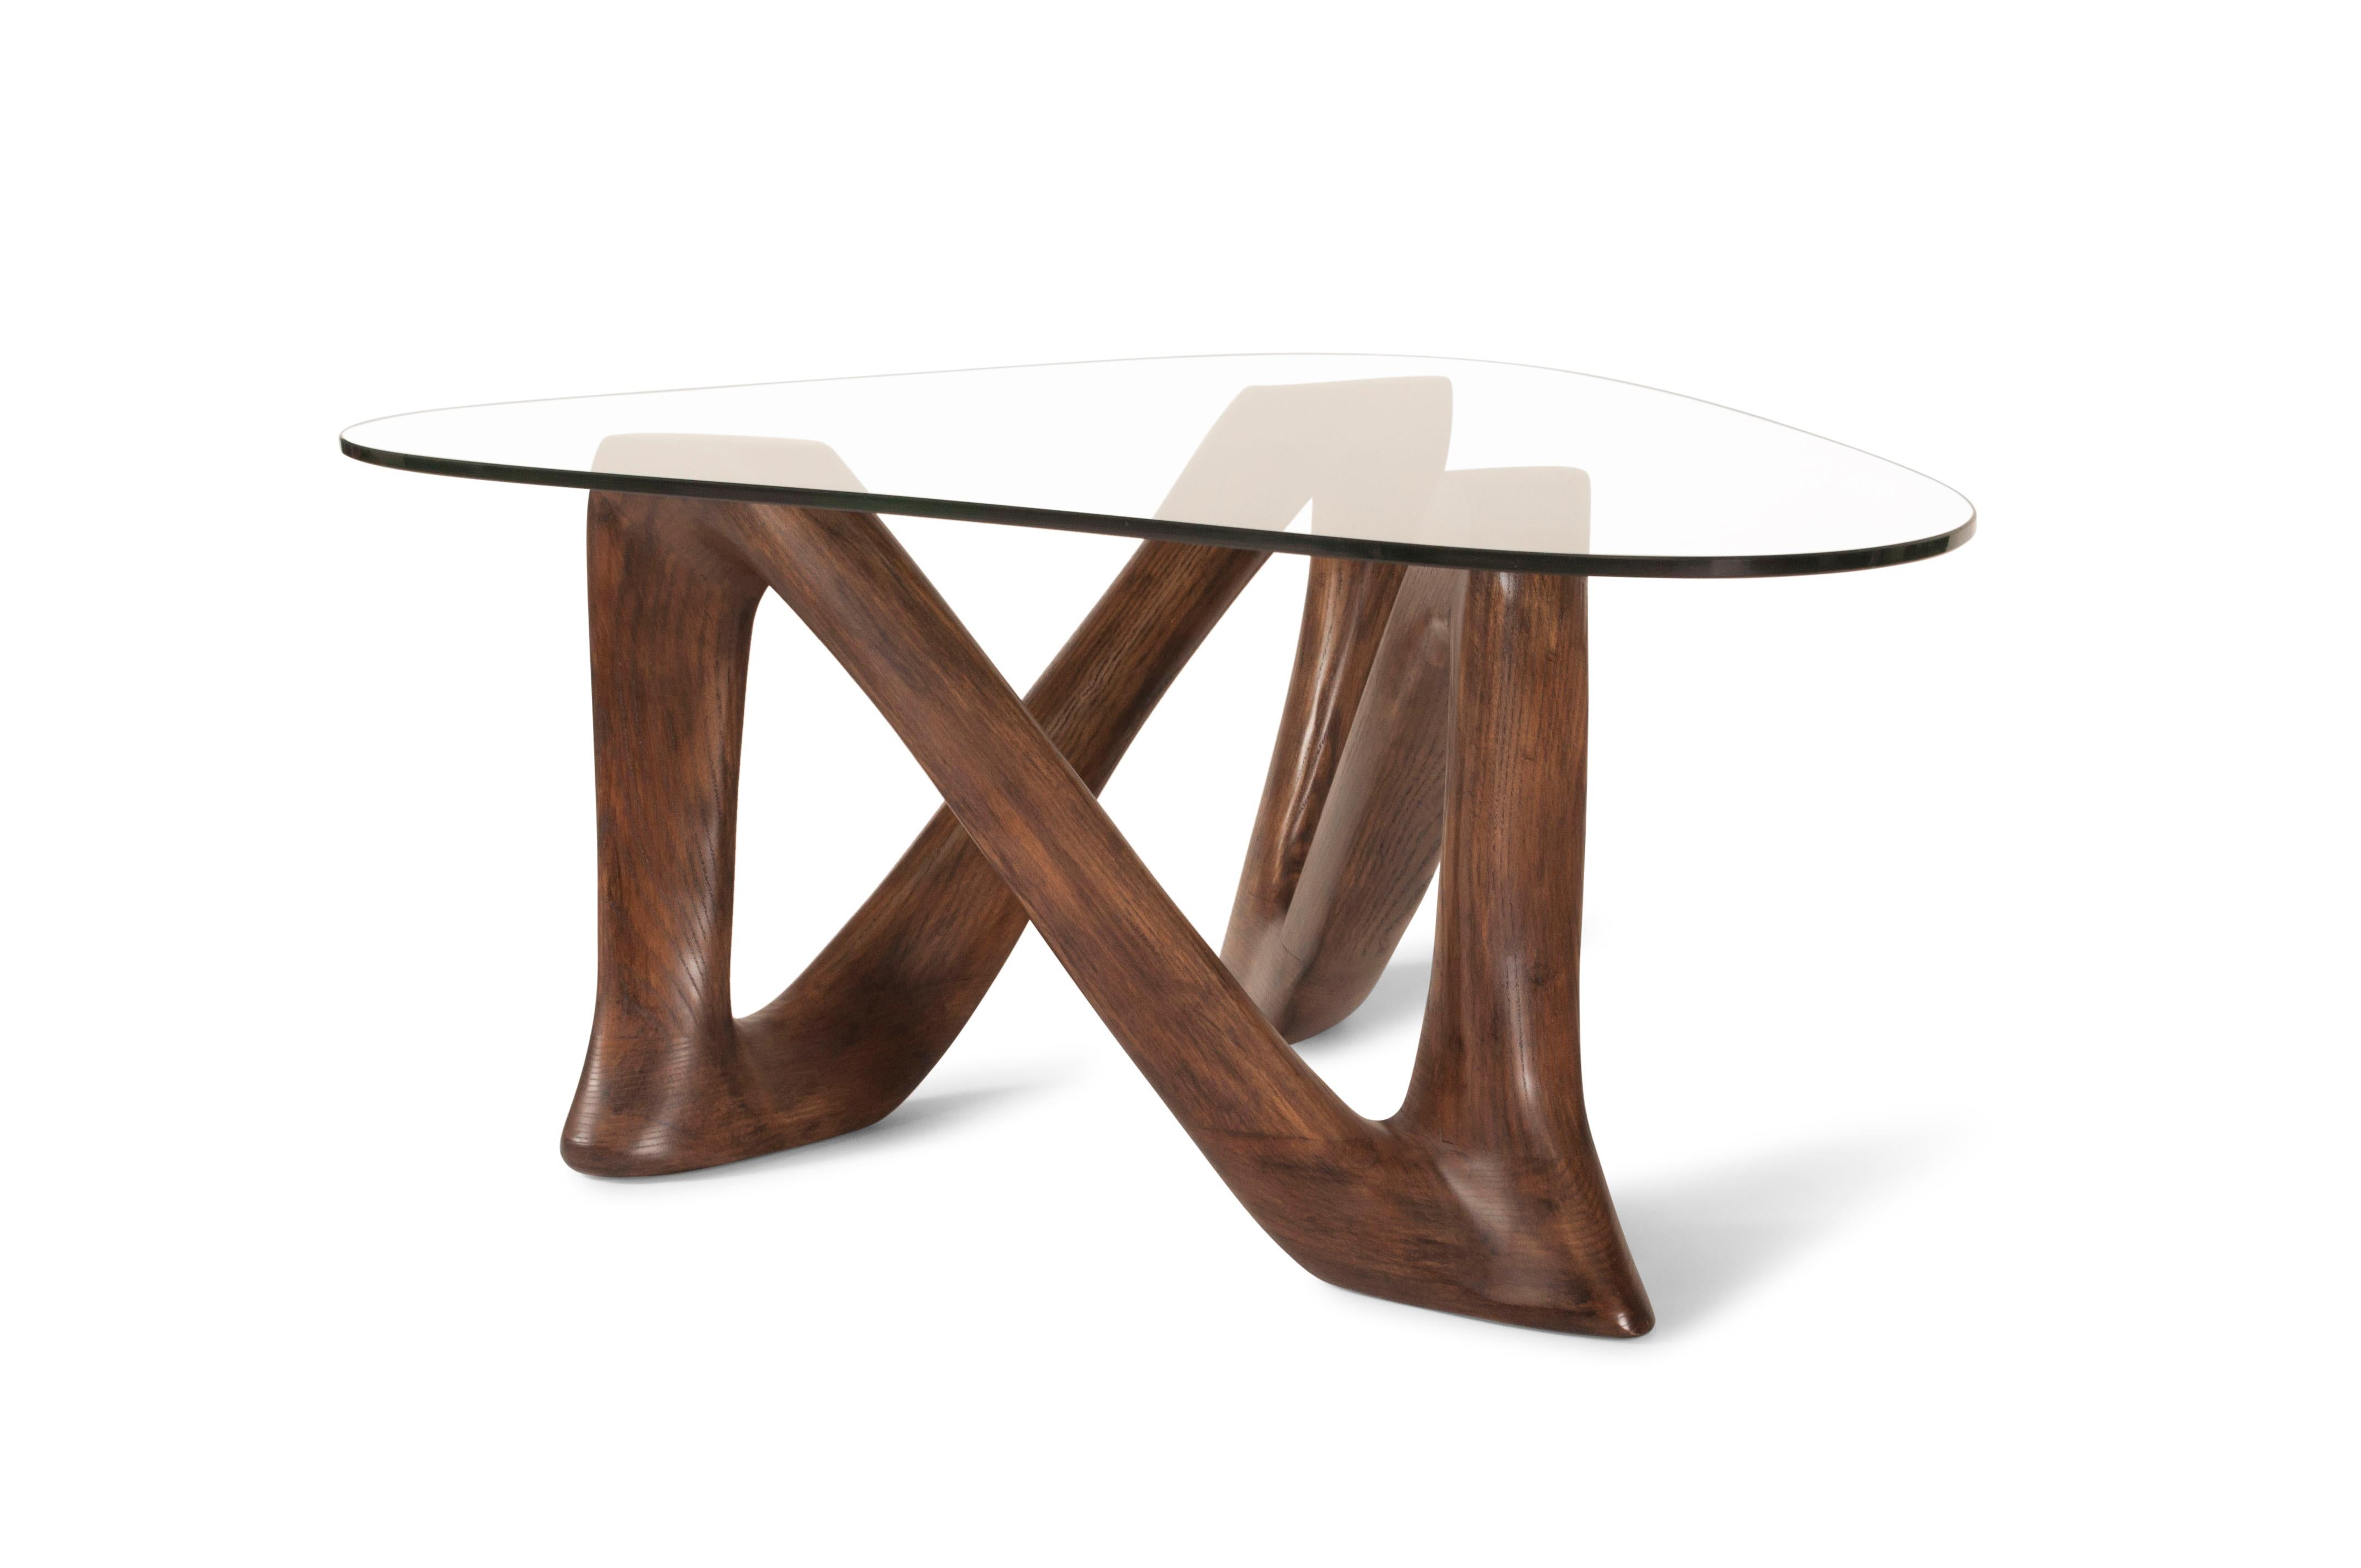 Carved Hermosa Coffee Table in Graphite Walnut stain on Ash wood with glass top For Sale